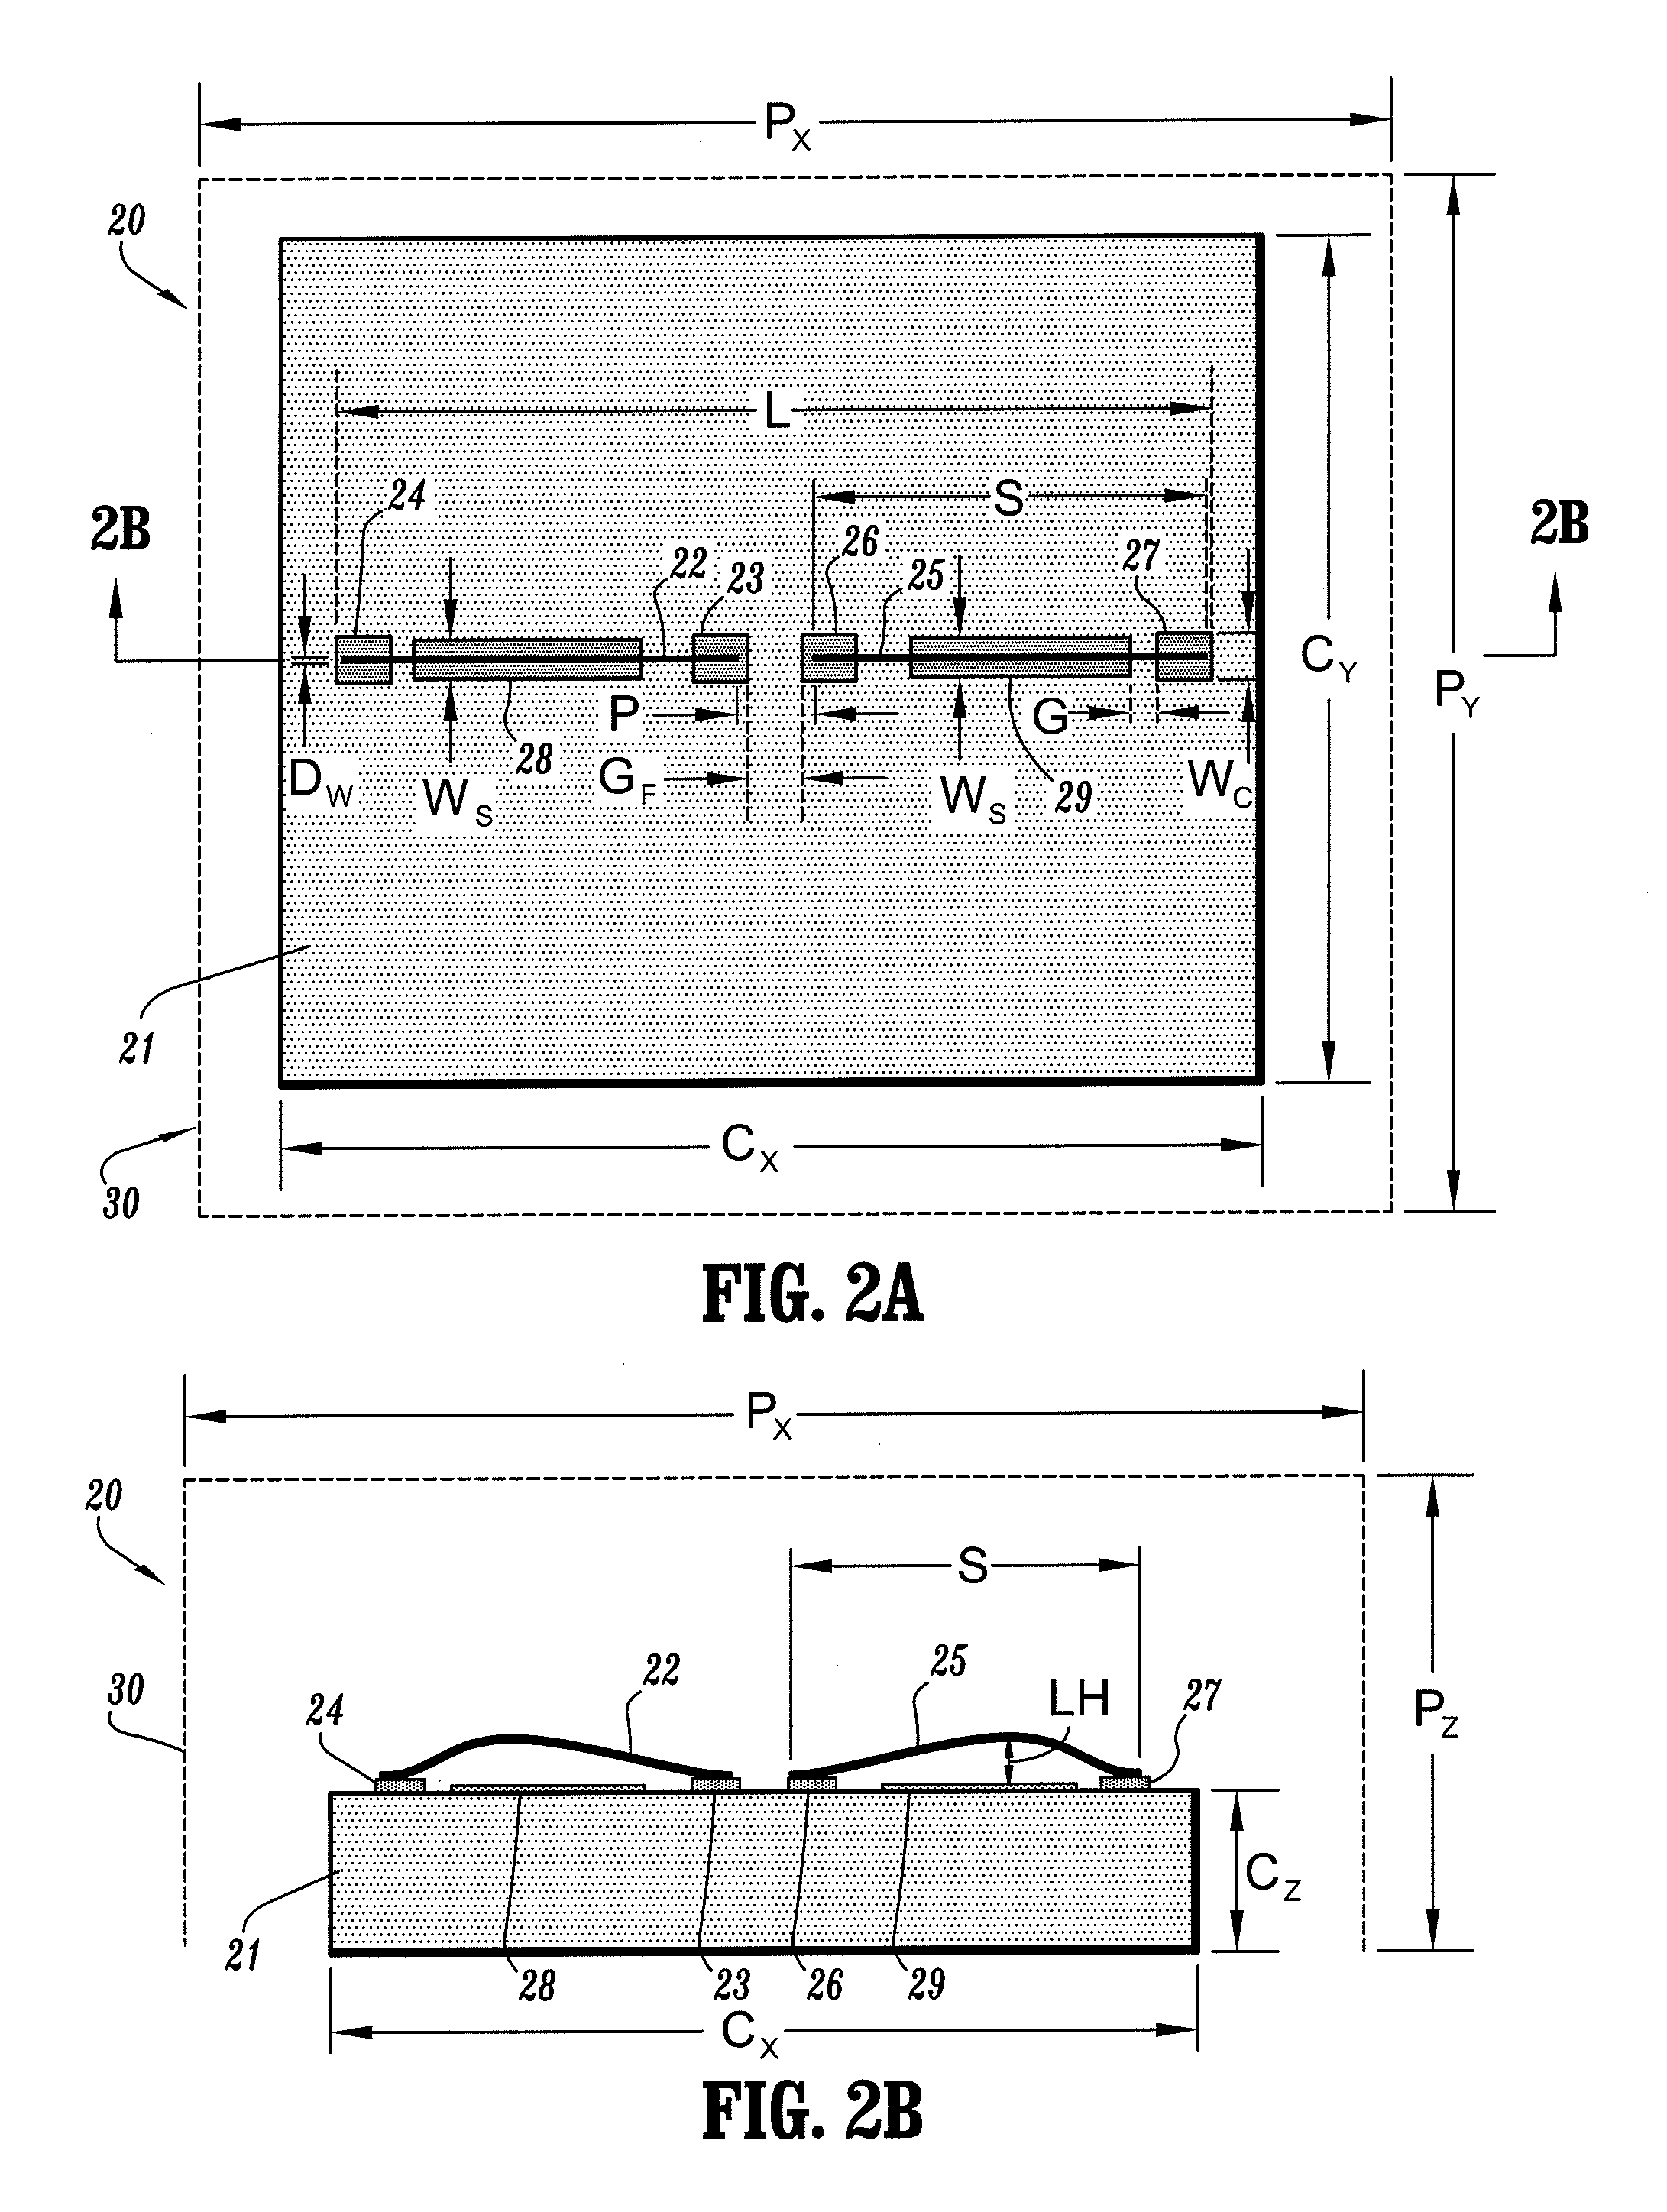 Apparatus and methods for constructing antennas using wire bonds as radiating elements